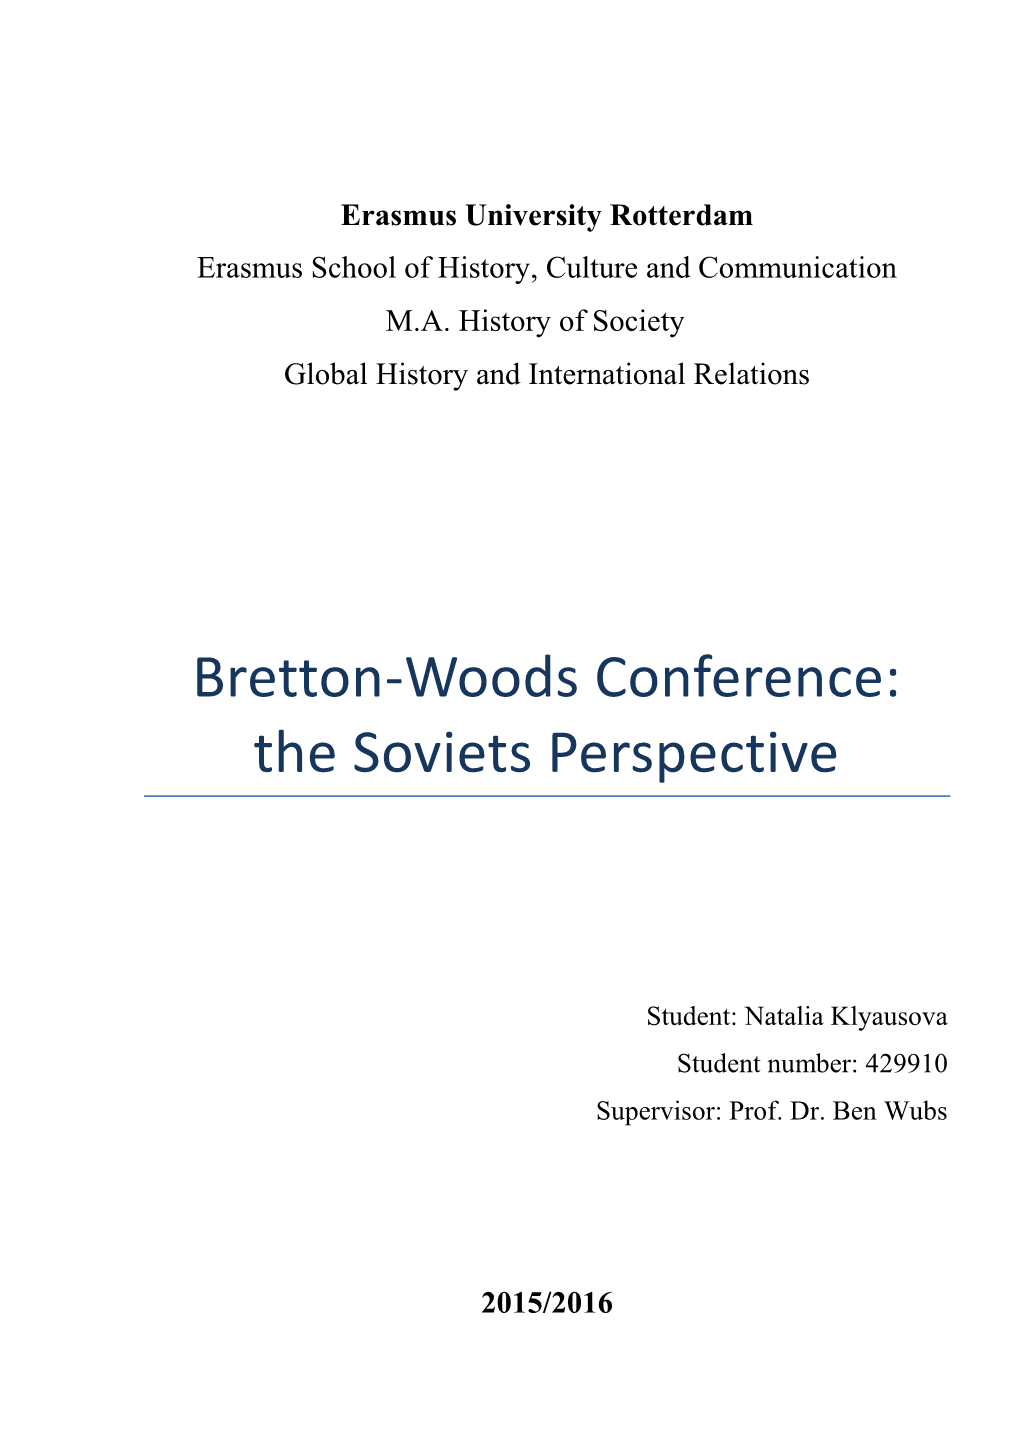 Bretton-Woods Conference: the Soviets Perspective